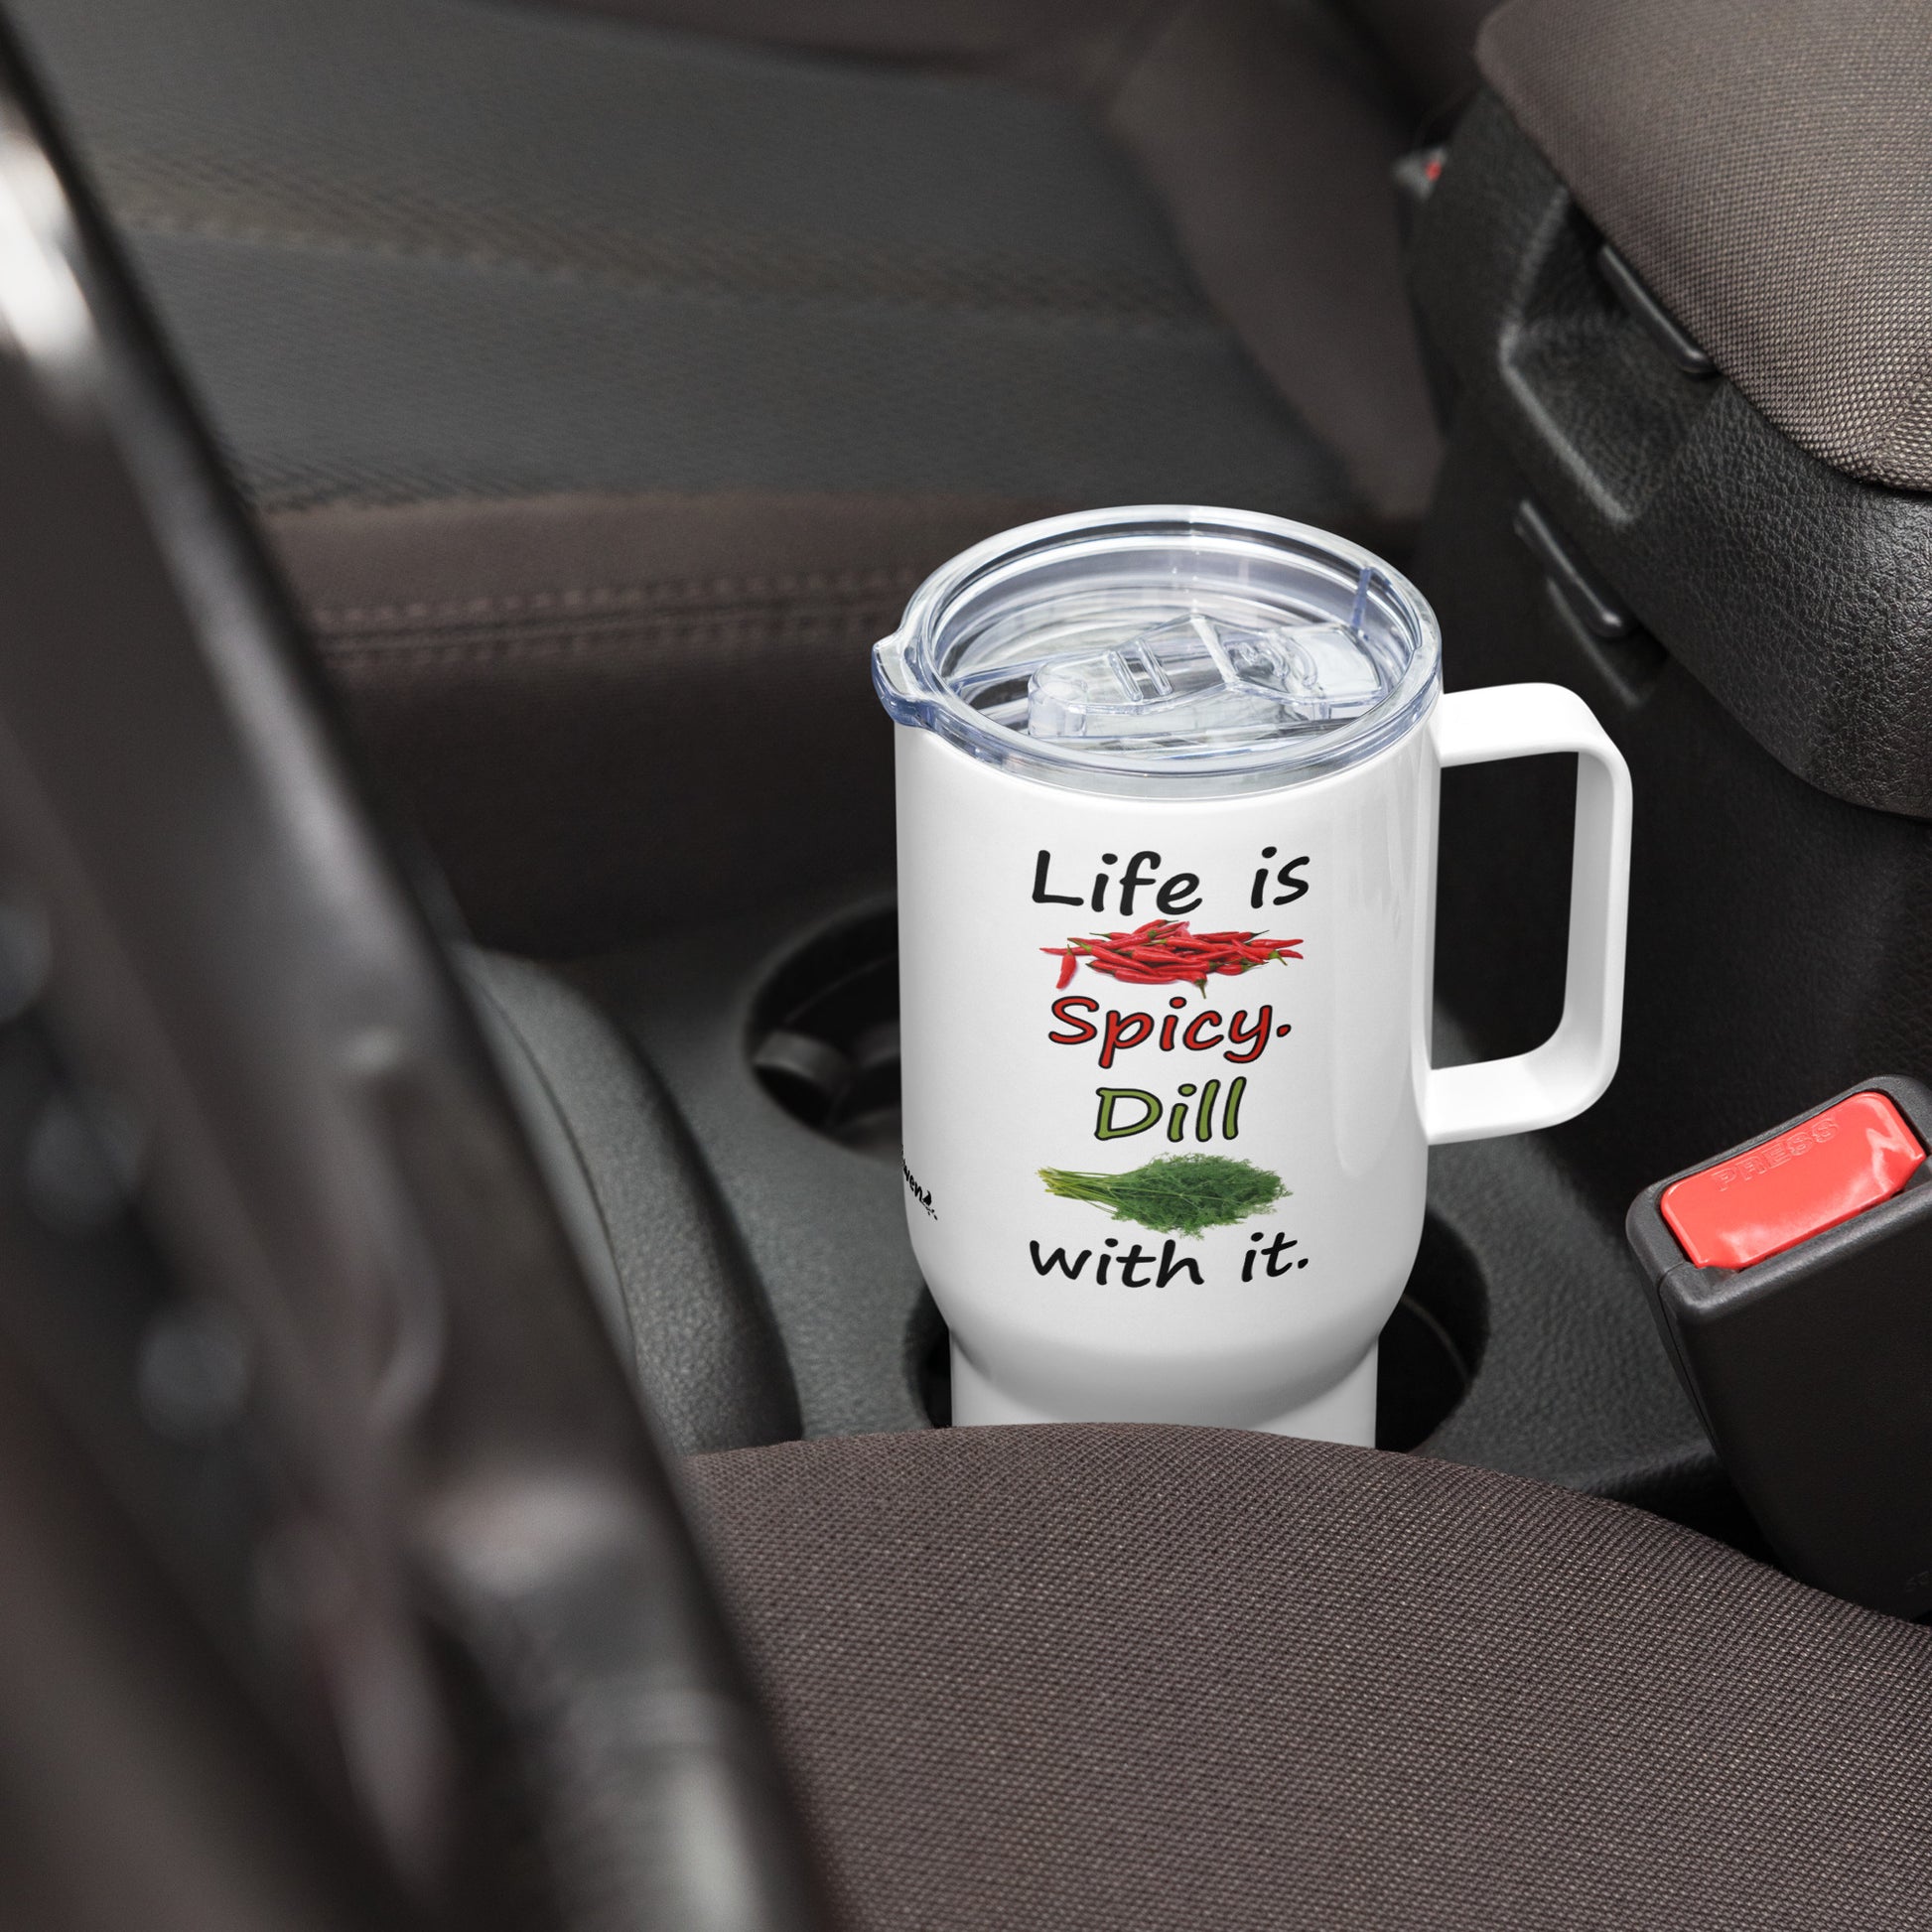 Stainless steel travel mug with handle. Holds 25 ounces of hot or cold liquids. Fits most car cup holders. Features double-sided phrase: Life is spicy. Dill with it, and accompanying chili pepper and dill weed images. Comes with spill proof plastic lid. Shown in car cup holder.